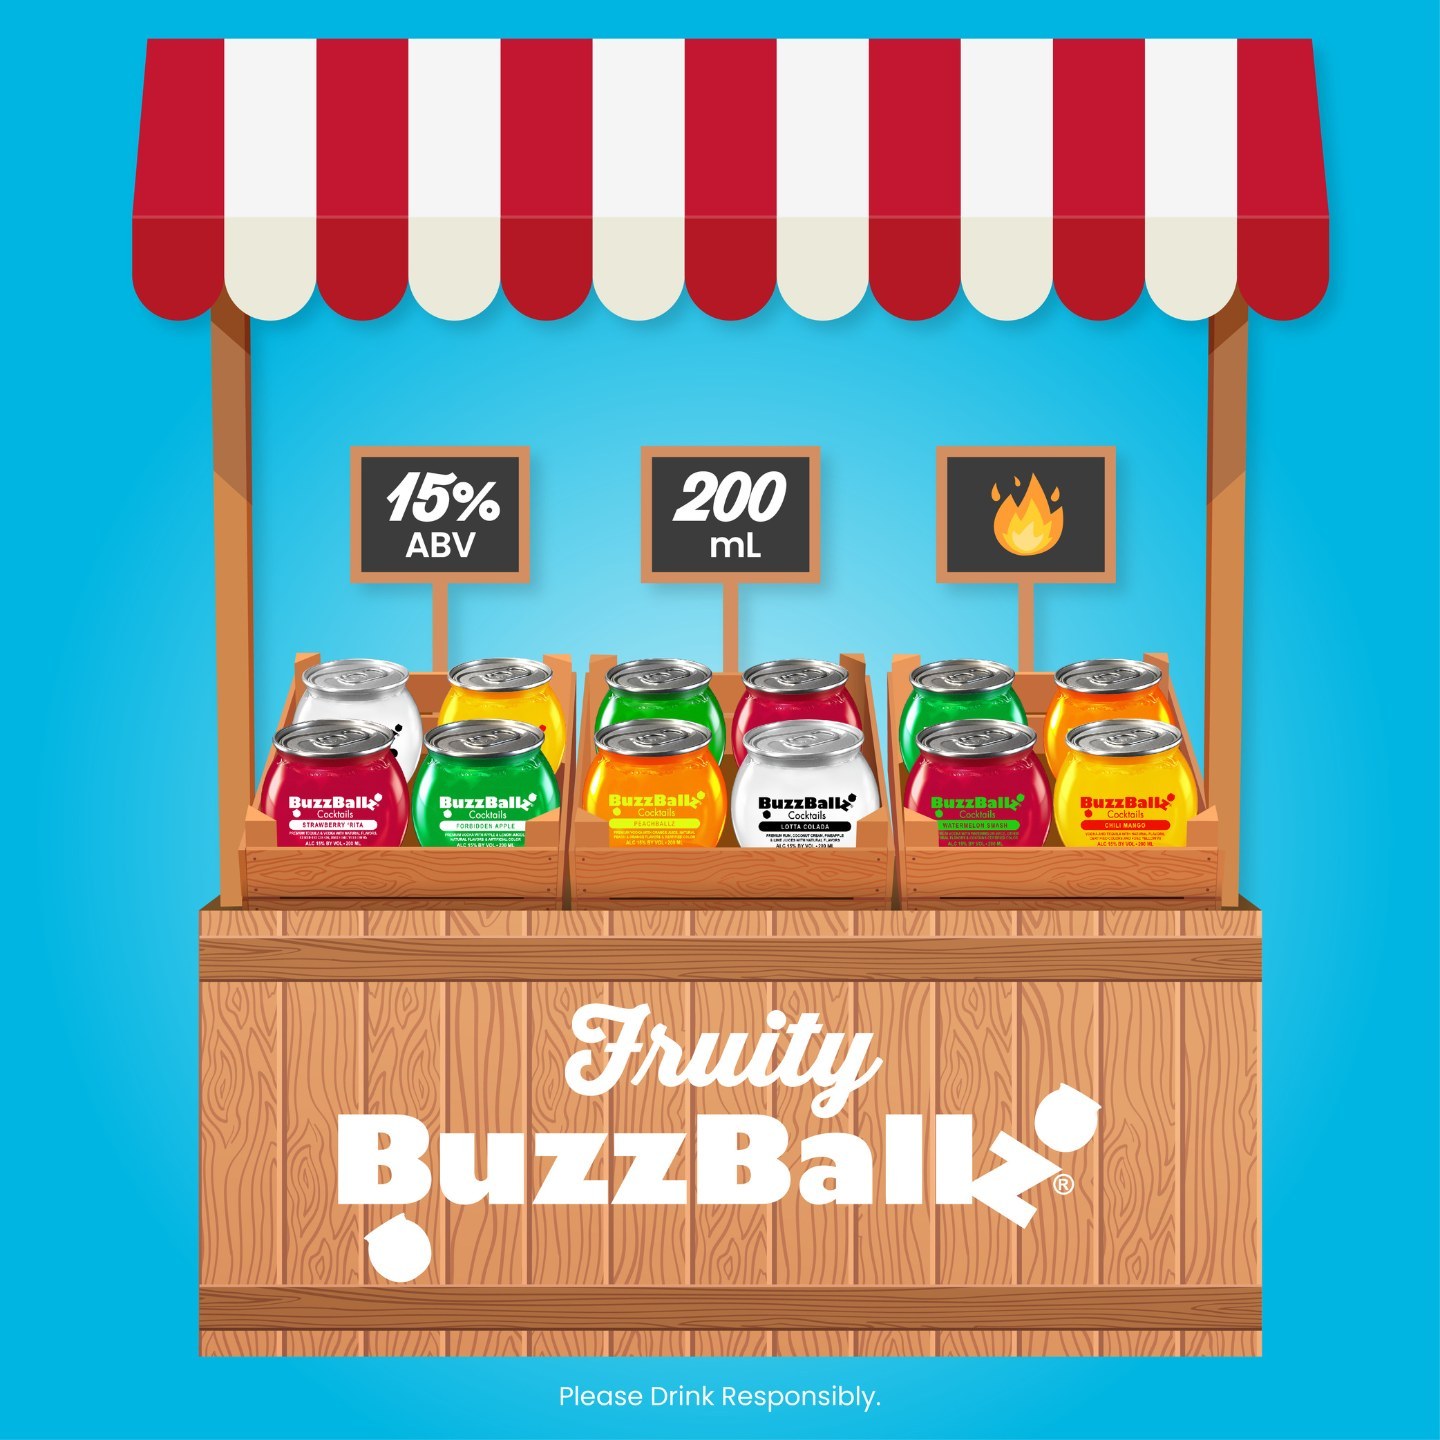 Can’t stand a day without some BuzzBallz? Would you stop by our “fruit stand” to pick some up? 🤔